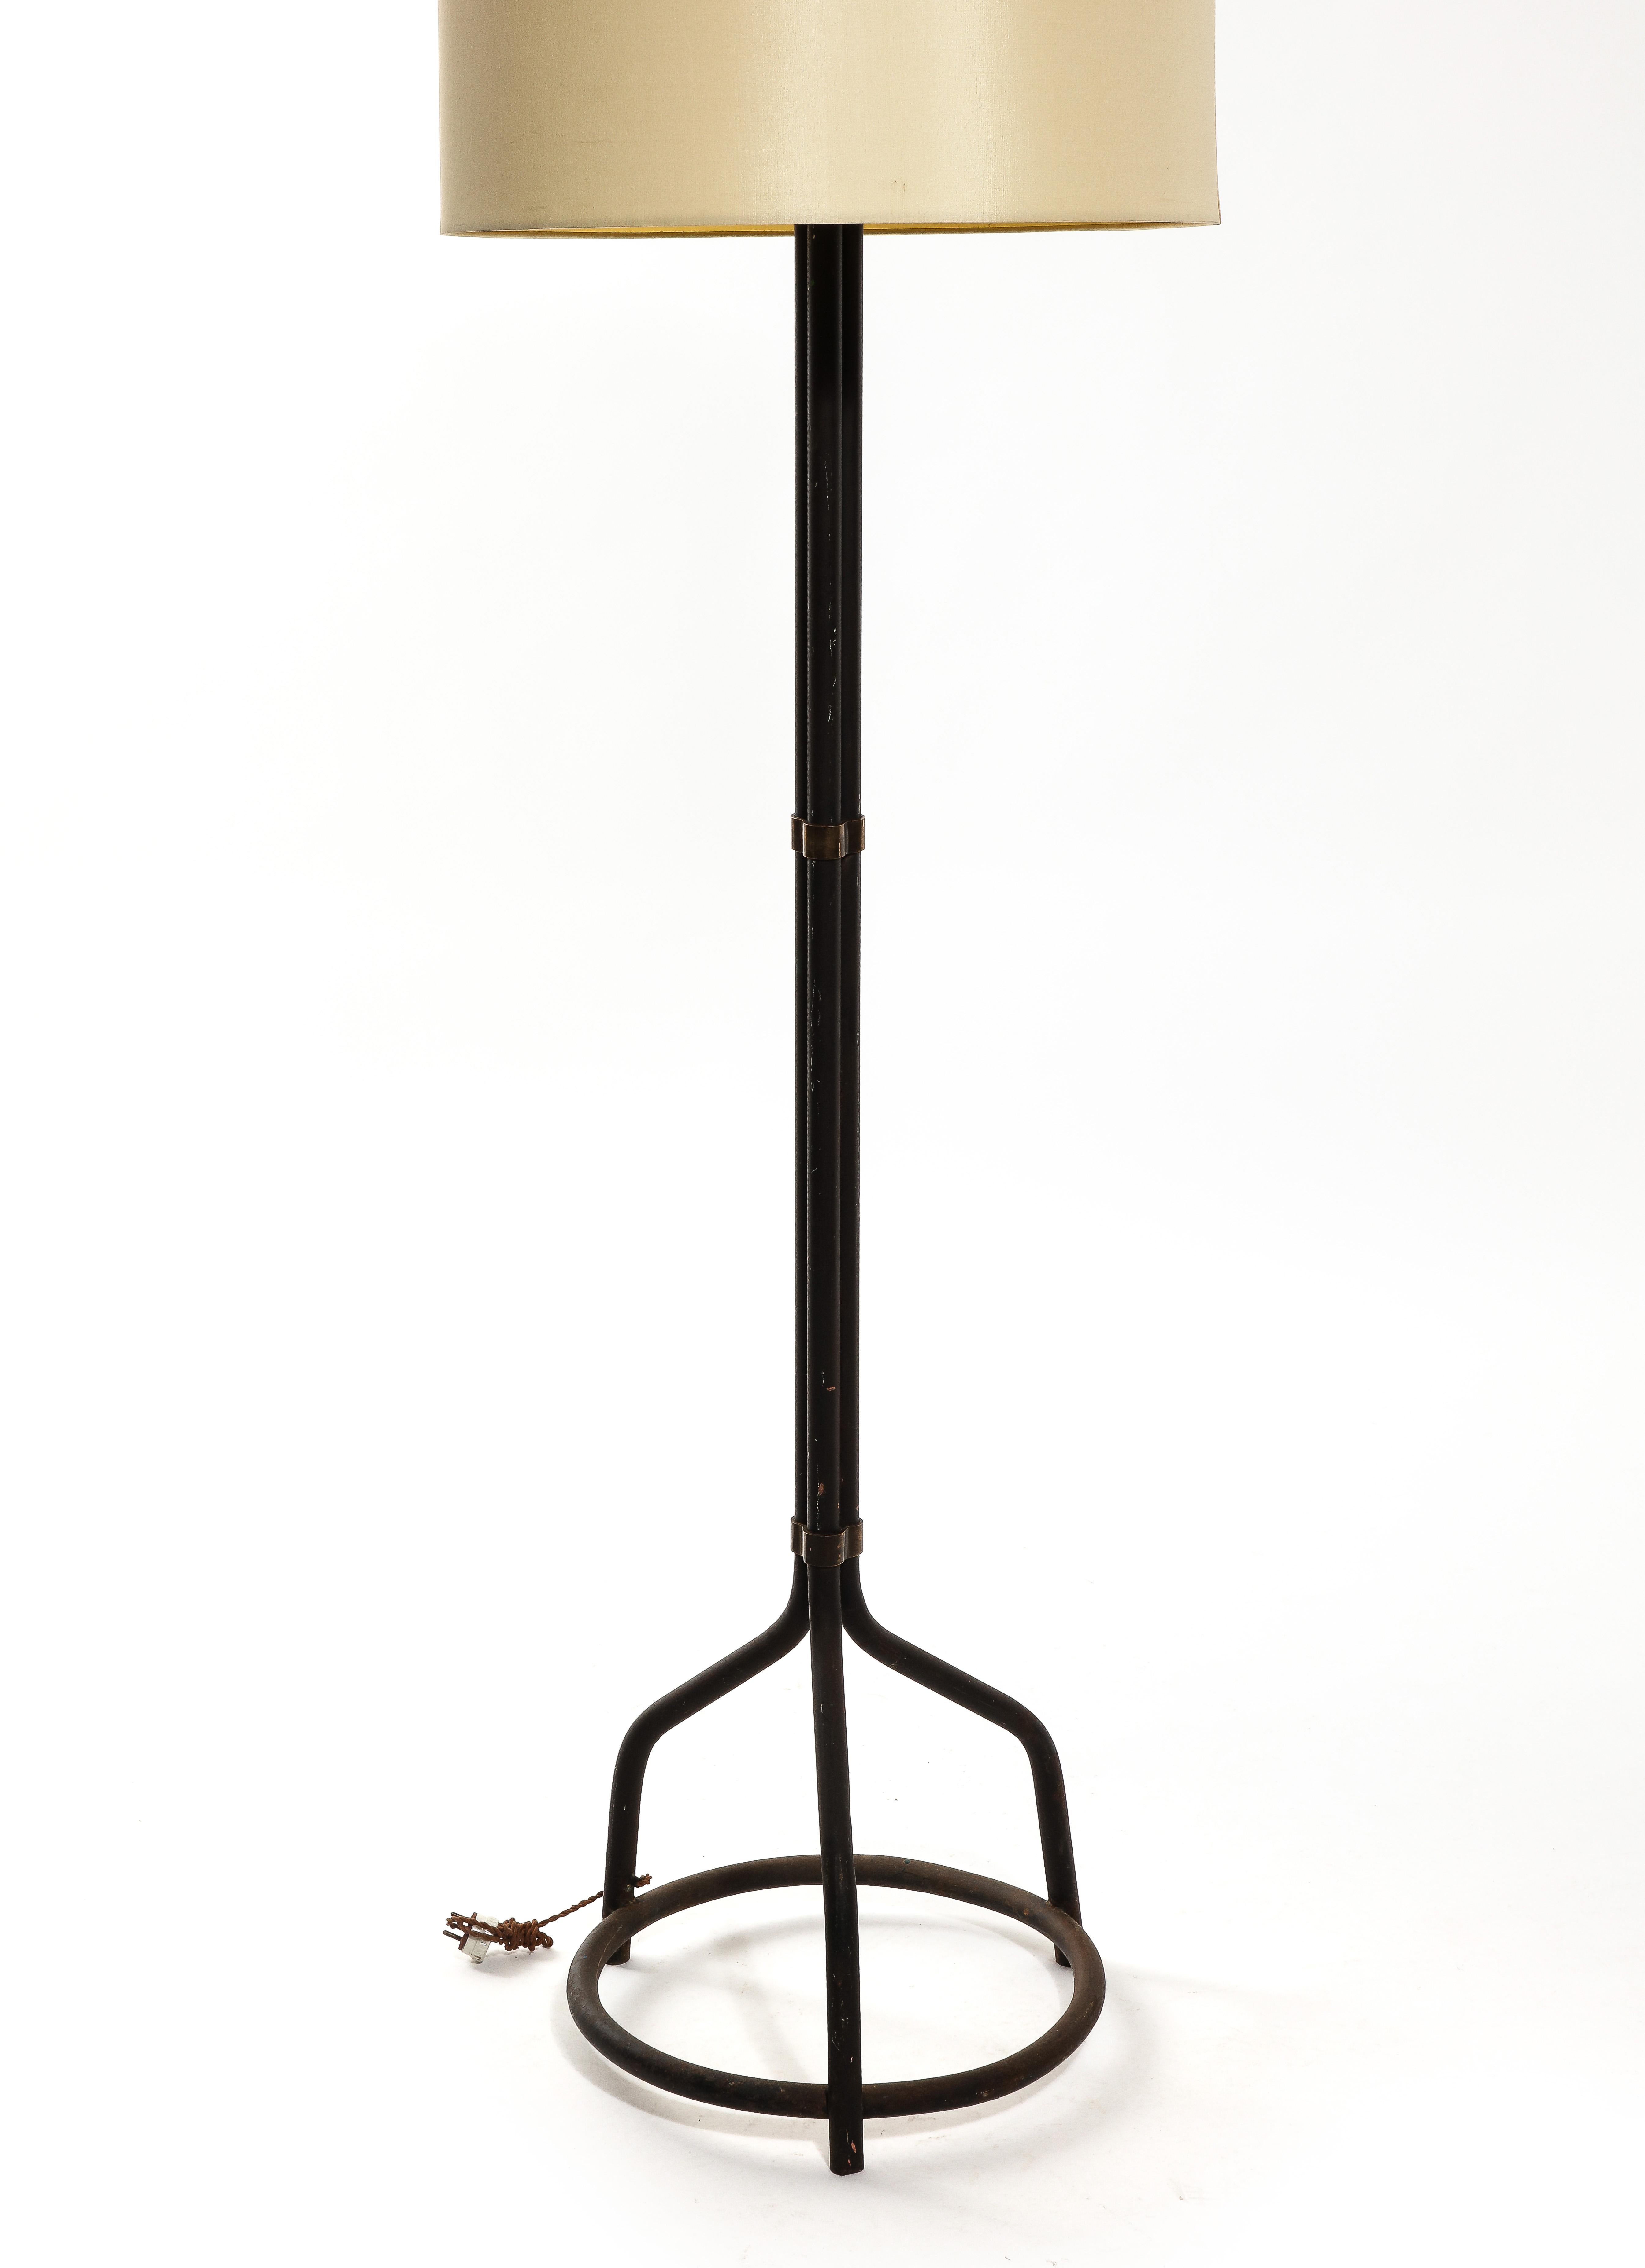 Industrial brutalist floor tripod flloor lamp made of black painted steel pipes with clover shpaed brass links on lower, mid and top sections. The tripod feet structure is conected by a circle horizontal bar which contrasts with the general graphic